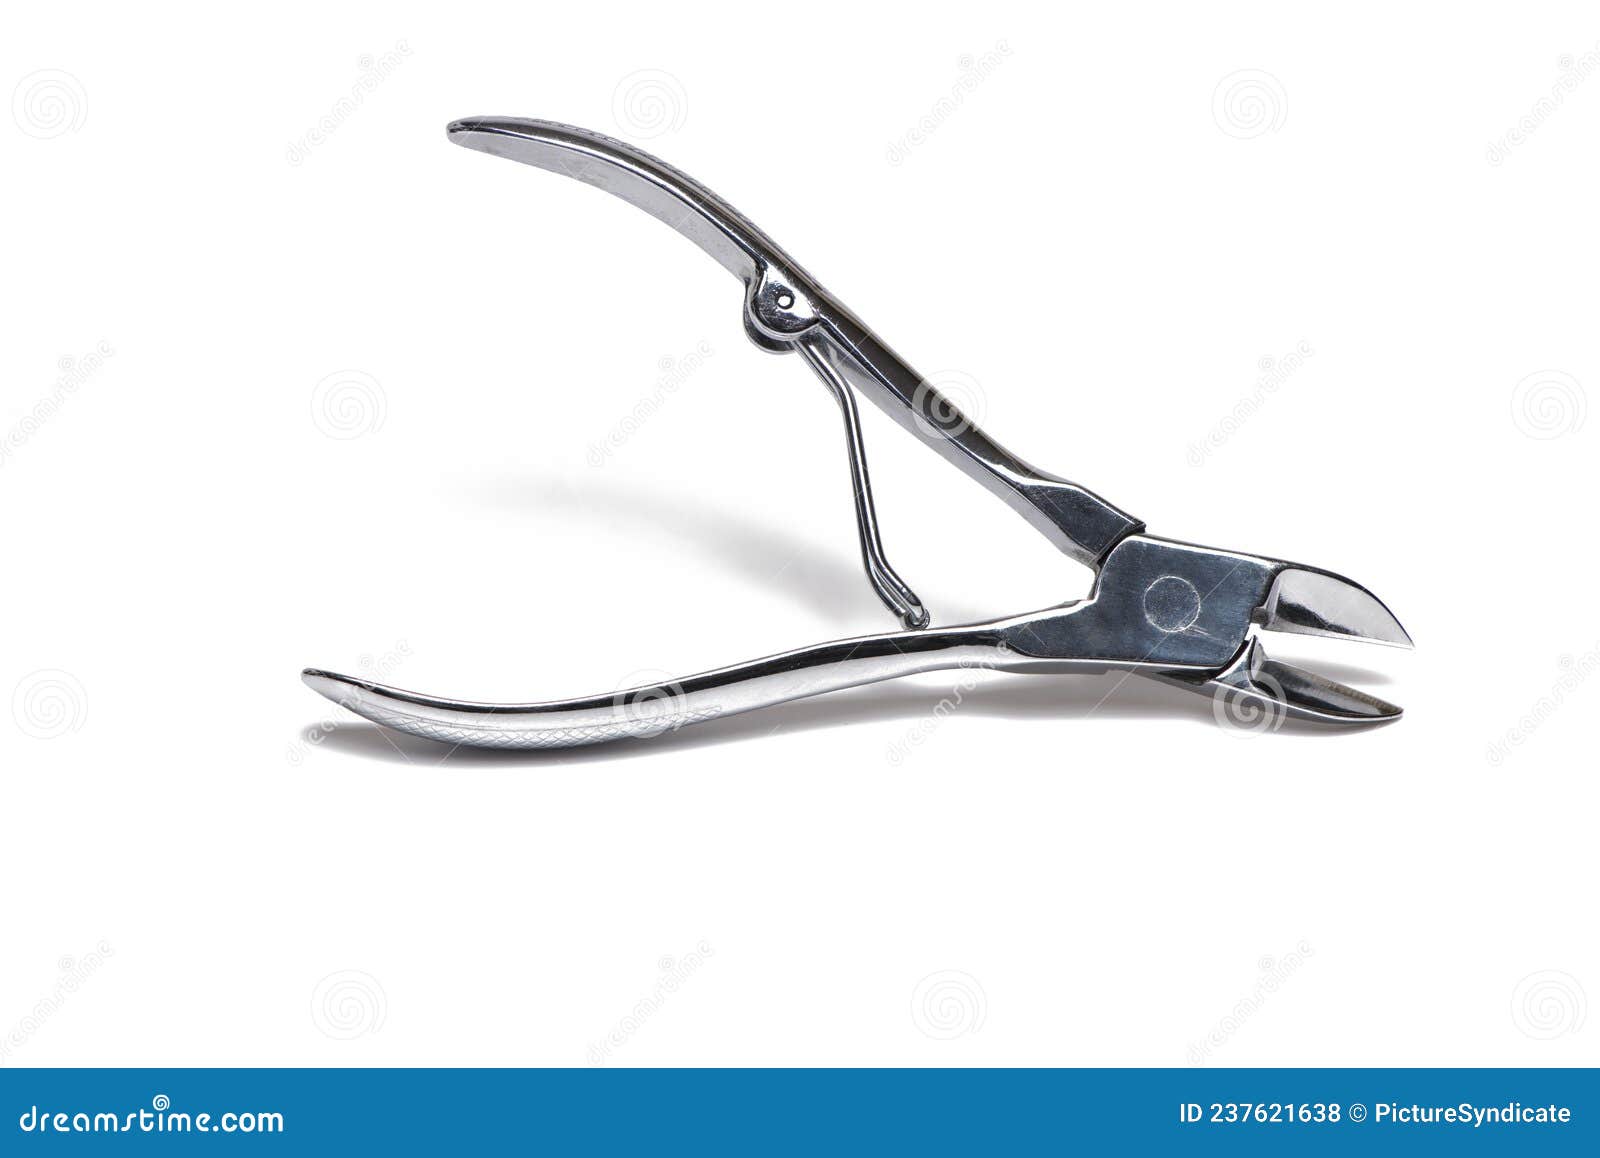 Eagle Nose Nail Clipper Dead Skin Scissors Foot Therapy Manicure Tools  Pedicure Pliers Nail Furrow Inlay Nail Clippers - AliExpress